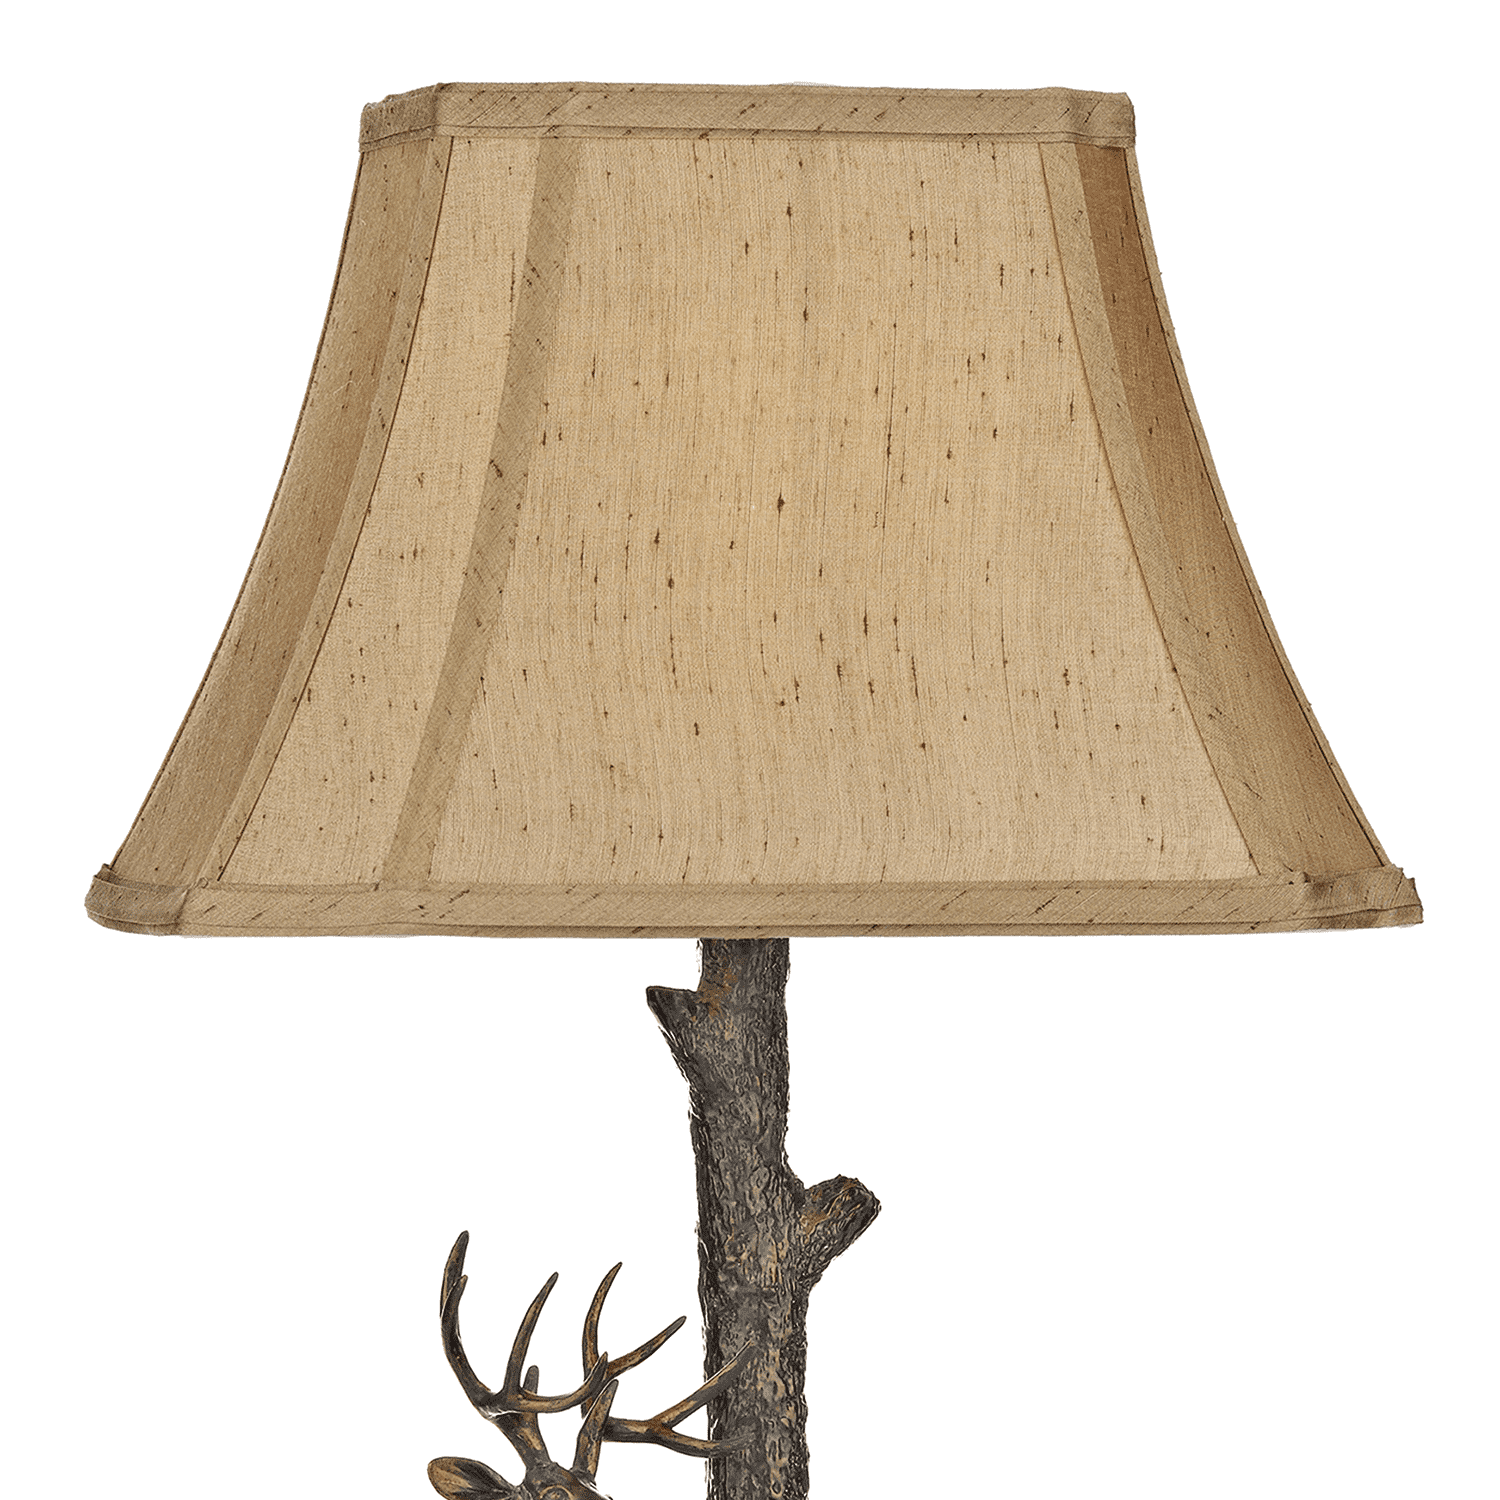 Stag Table Lamp With Shade